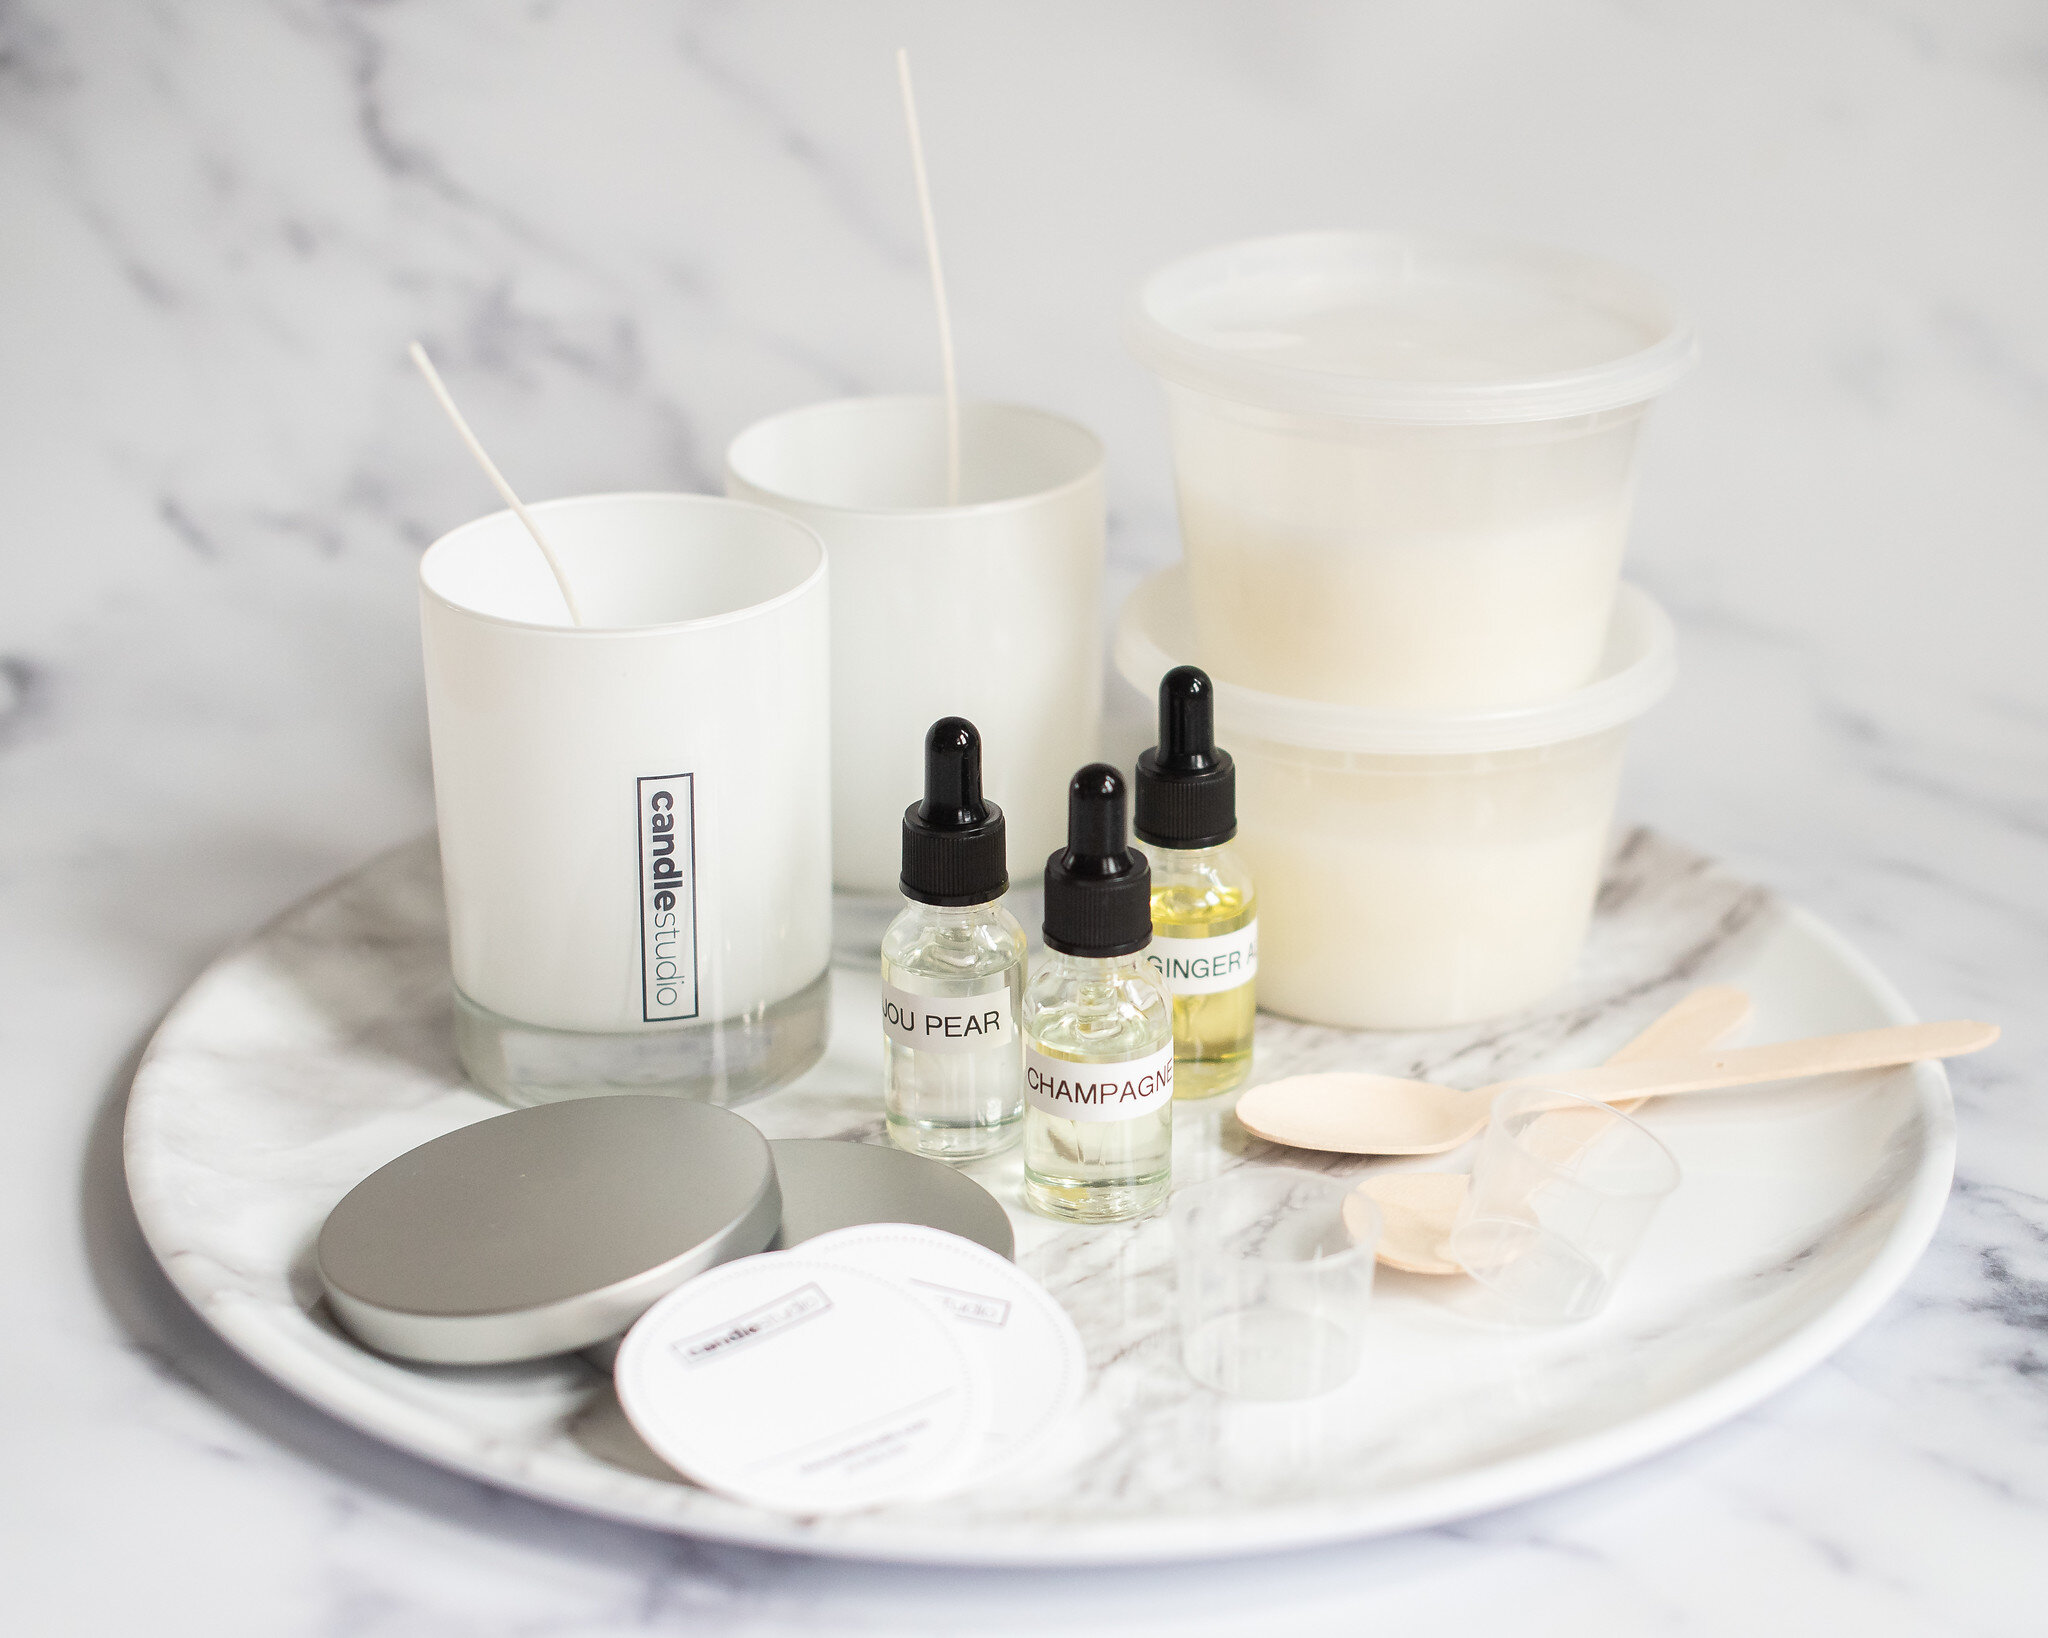 Home Candle Kits are Coming Your Way! — The Candle Studio